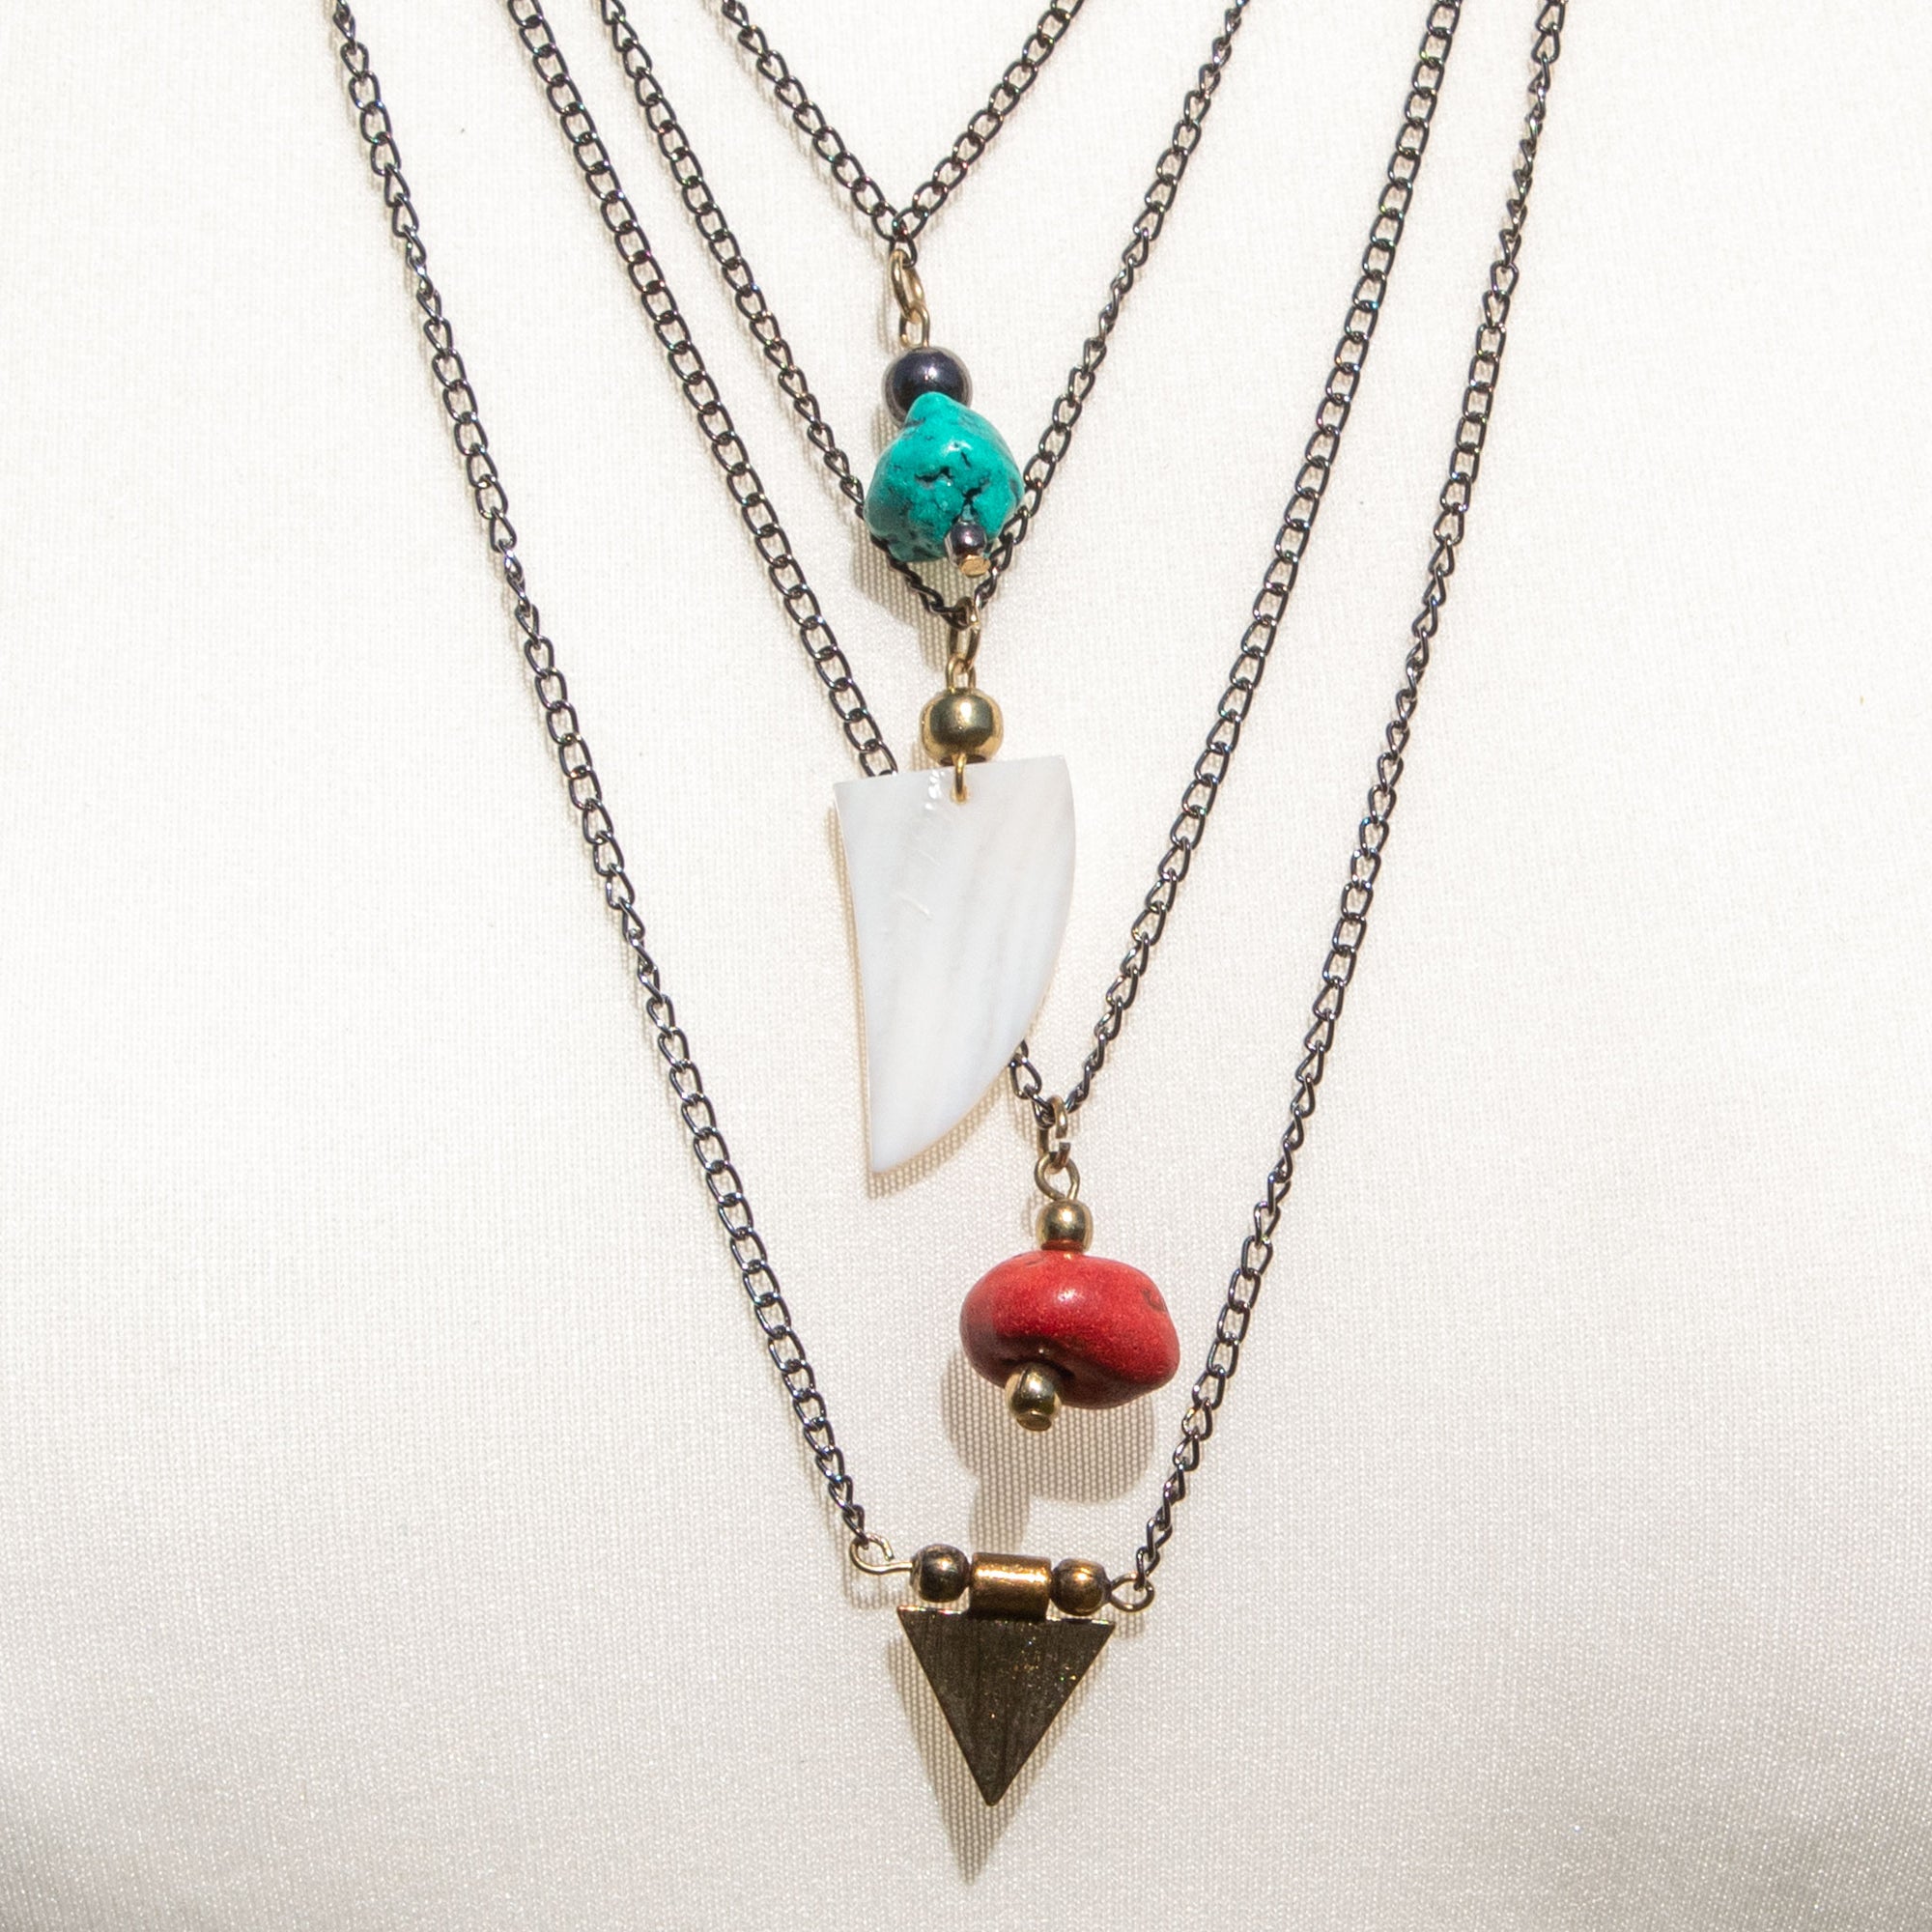 Multi Chain & Pendant Necklace | Necklace - The Naughty Shrew